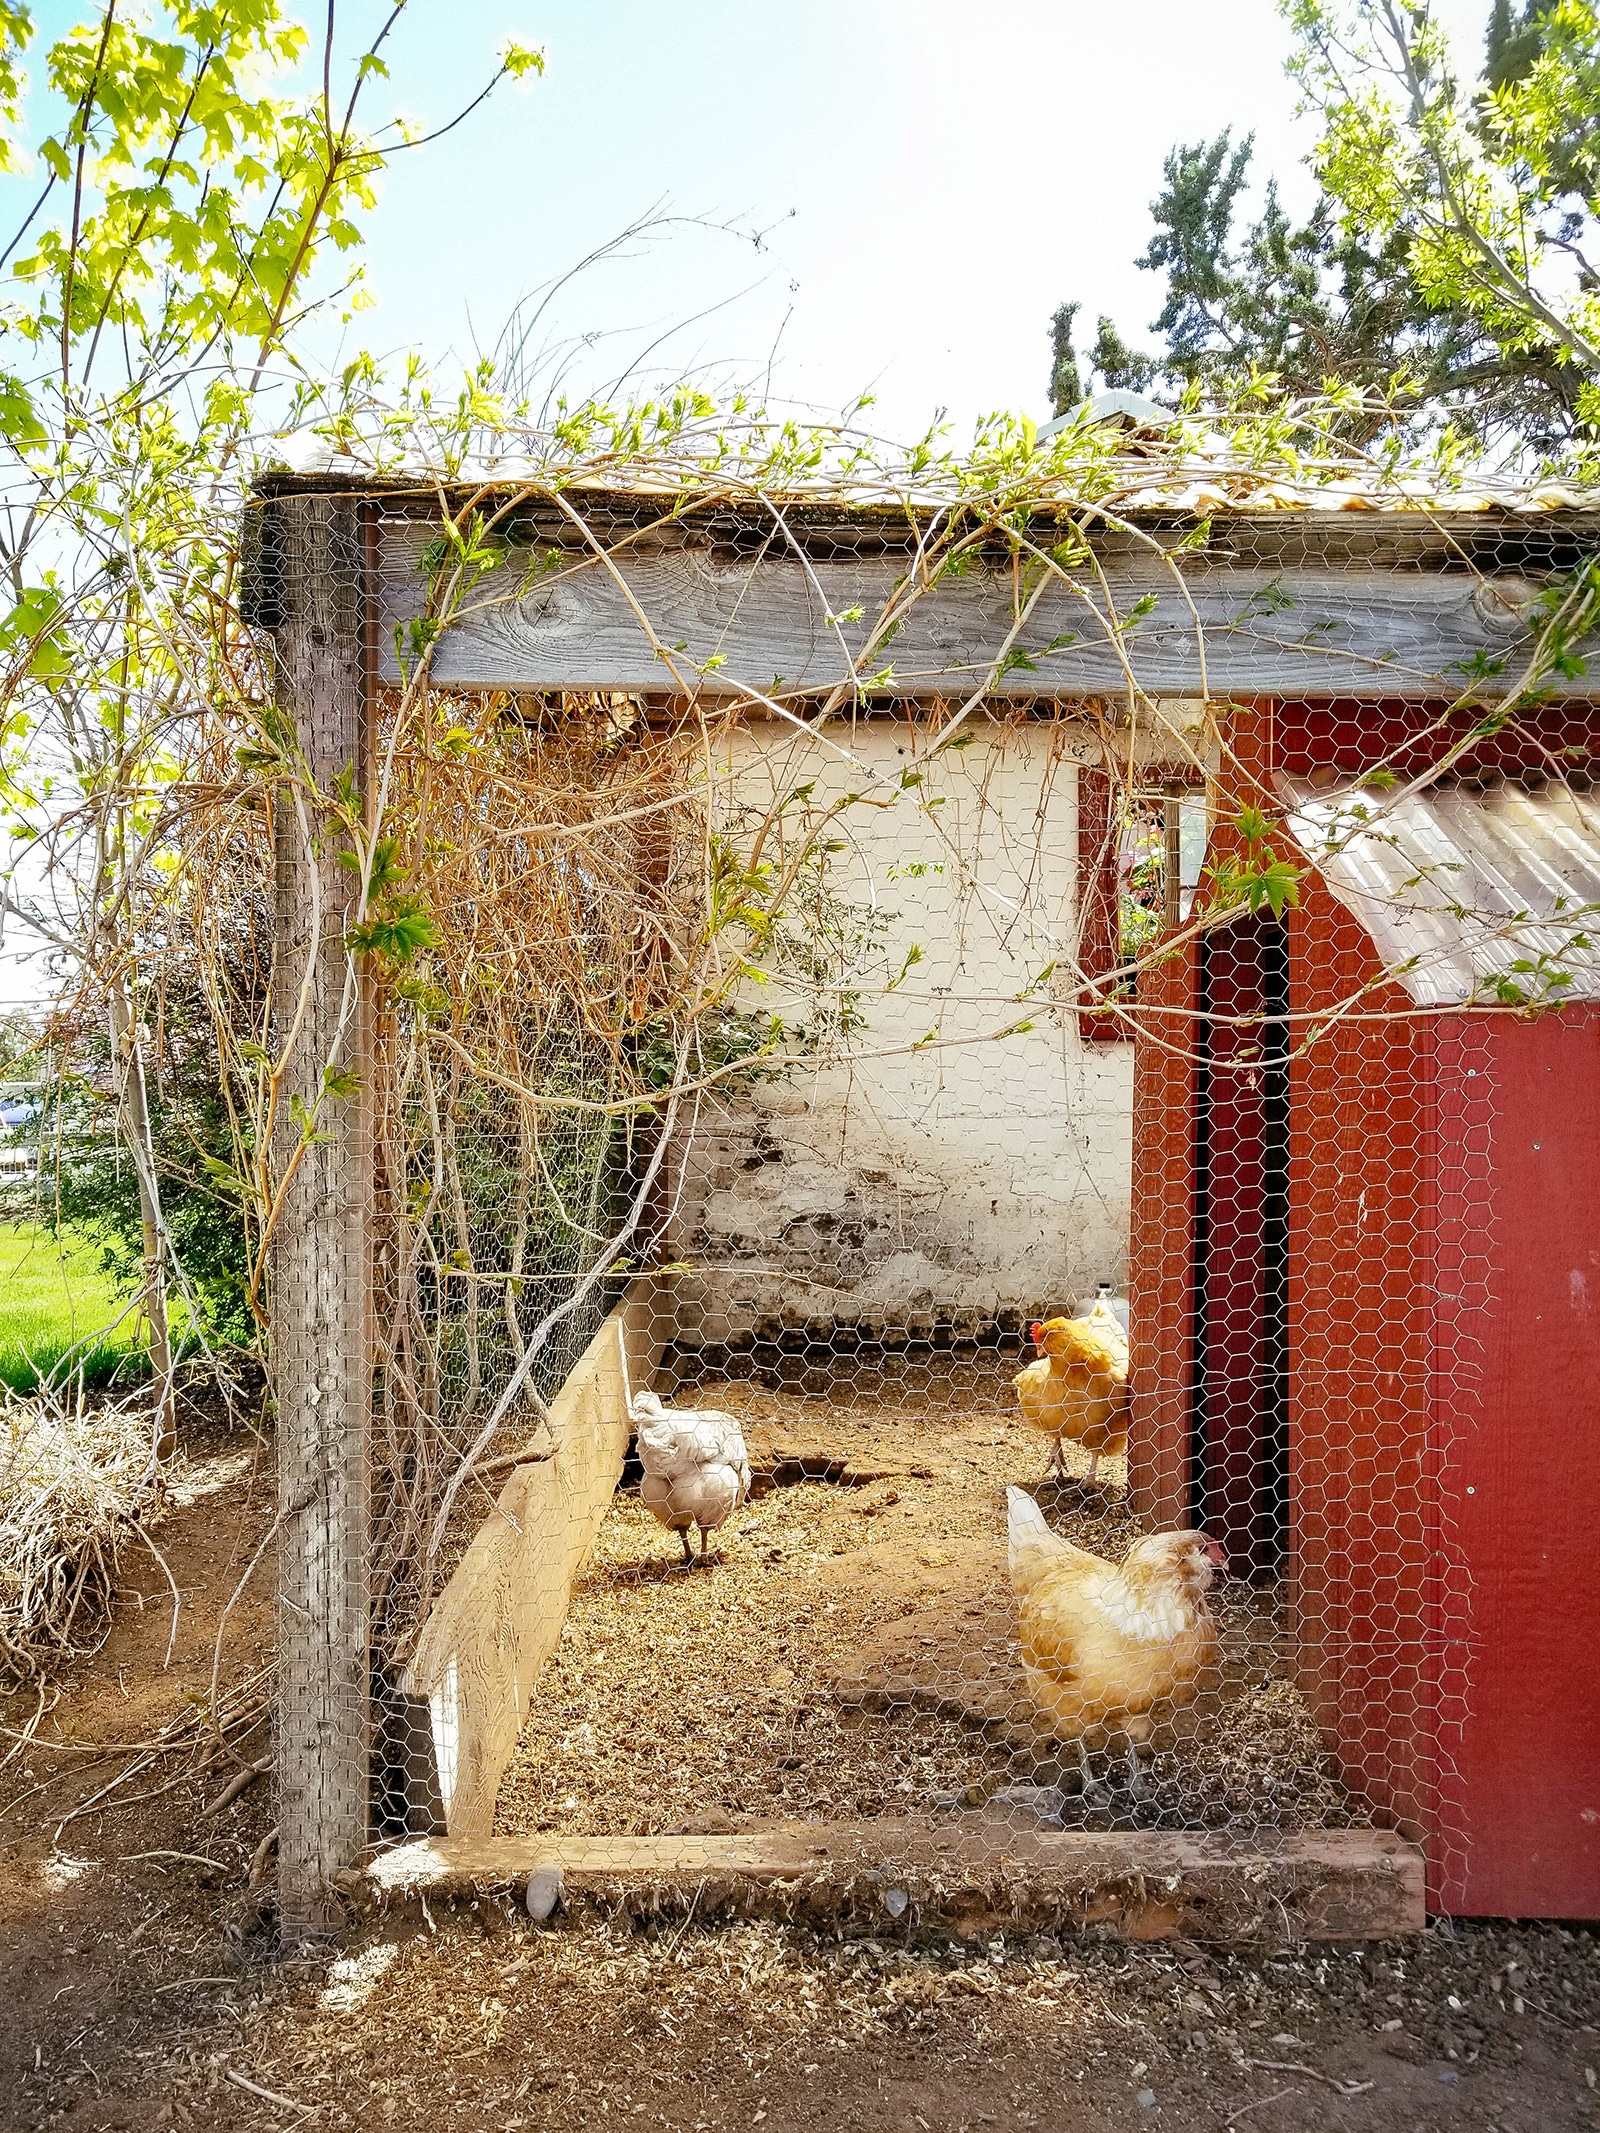 Three chickens roaming inside a rustic chicken run next to a red wooden coop